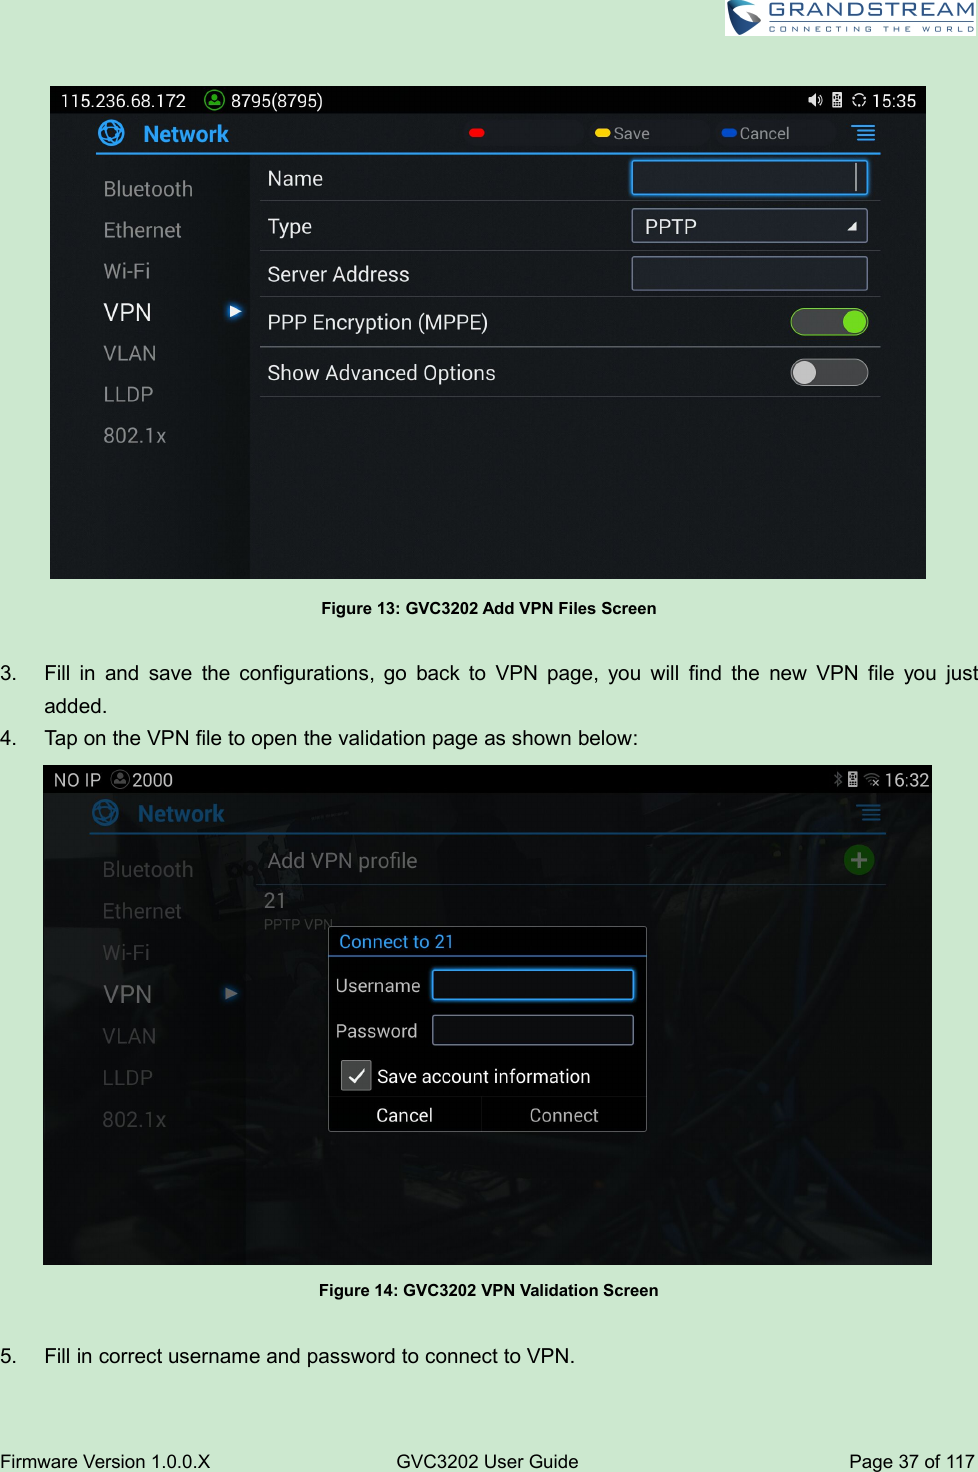 Firmware Version 1.0.0.XGVC3202 User GuidePage 37 of 117Figure 13: GVC3202 Add VPN Files Screen3. Fill in and save the configurations, go back to VPN page, you will find the new VPN file you justadded.4. Tap on the VPN file to open the validation page as shown below:Figure 14: GVC3202 VPN Validation Screen5. Fill in correct username and password to connect to VPN.